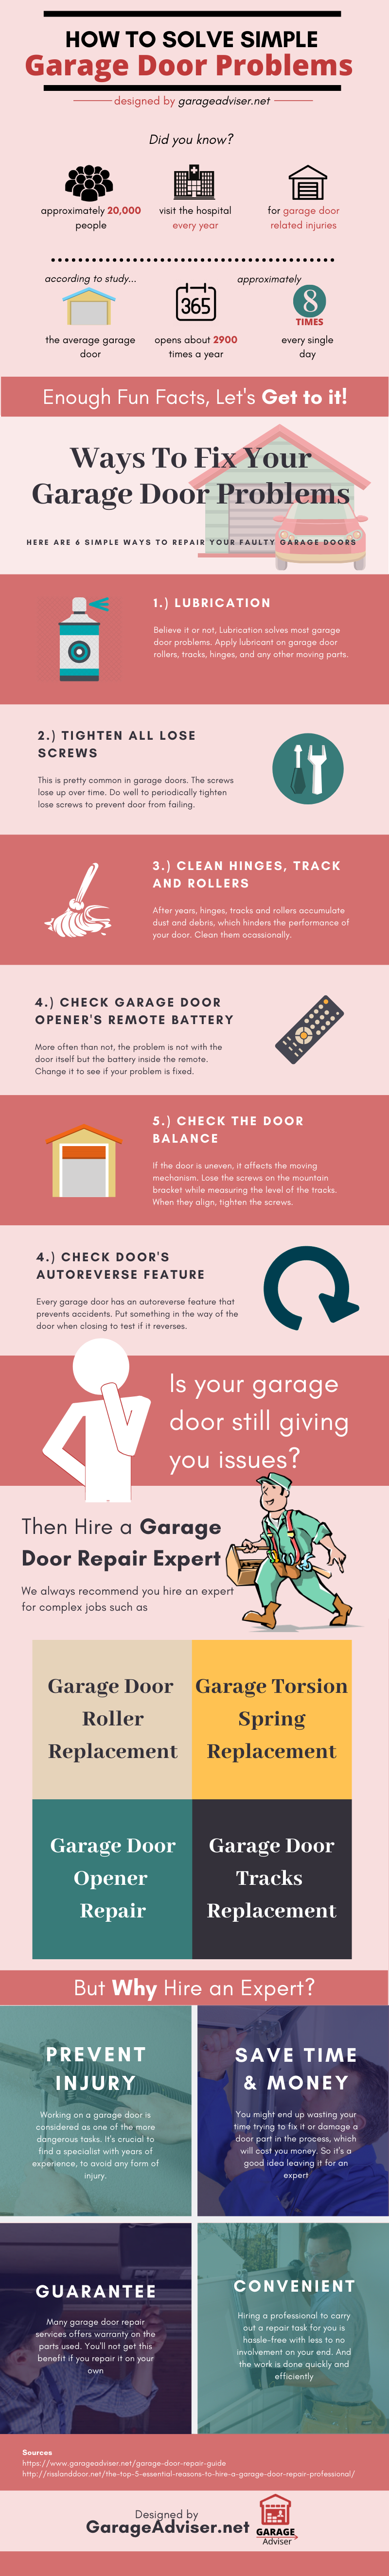 6 Simple but Crucial Tips for Garage Door Maintenance - Infographic